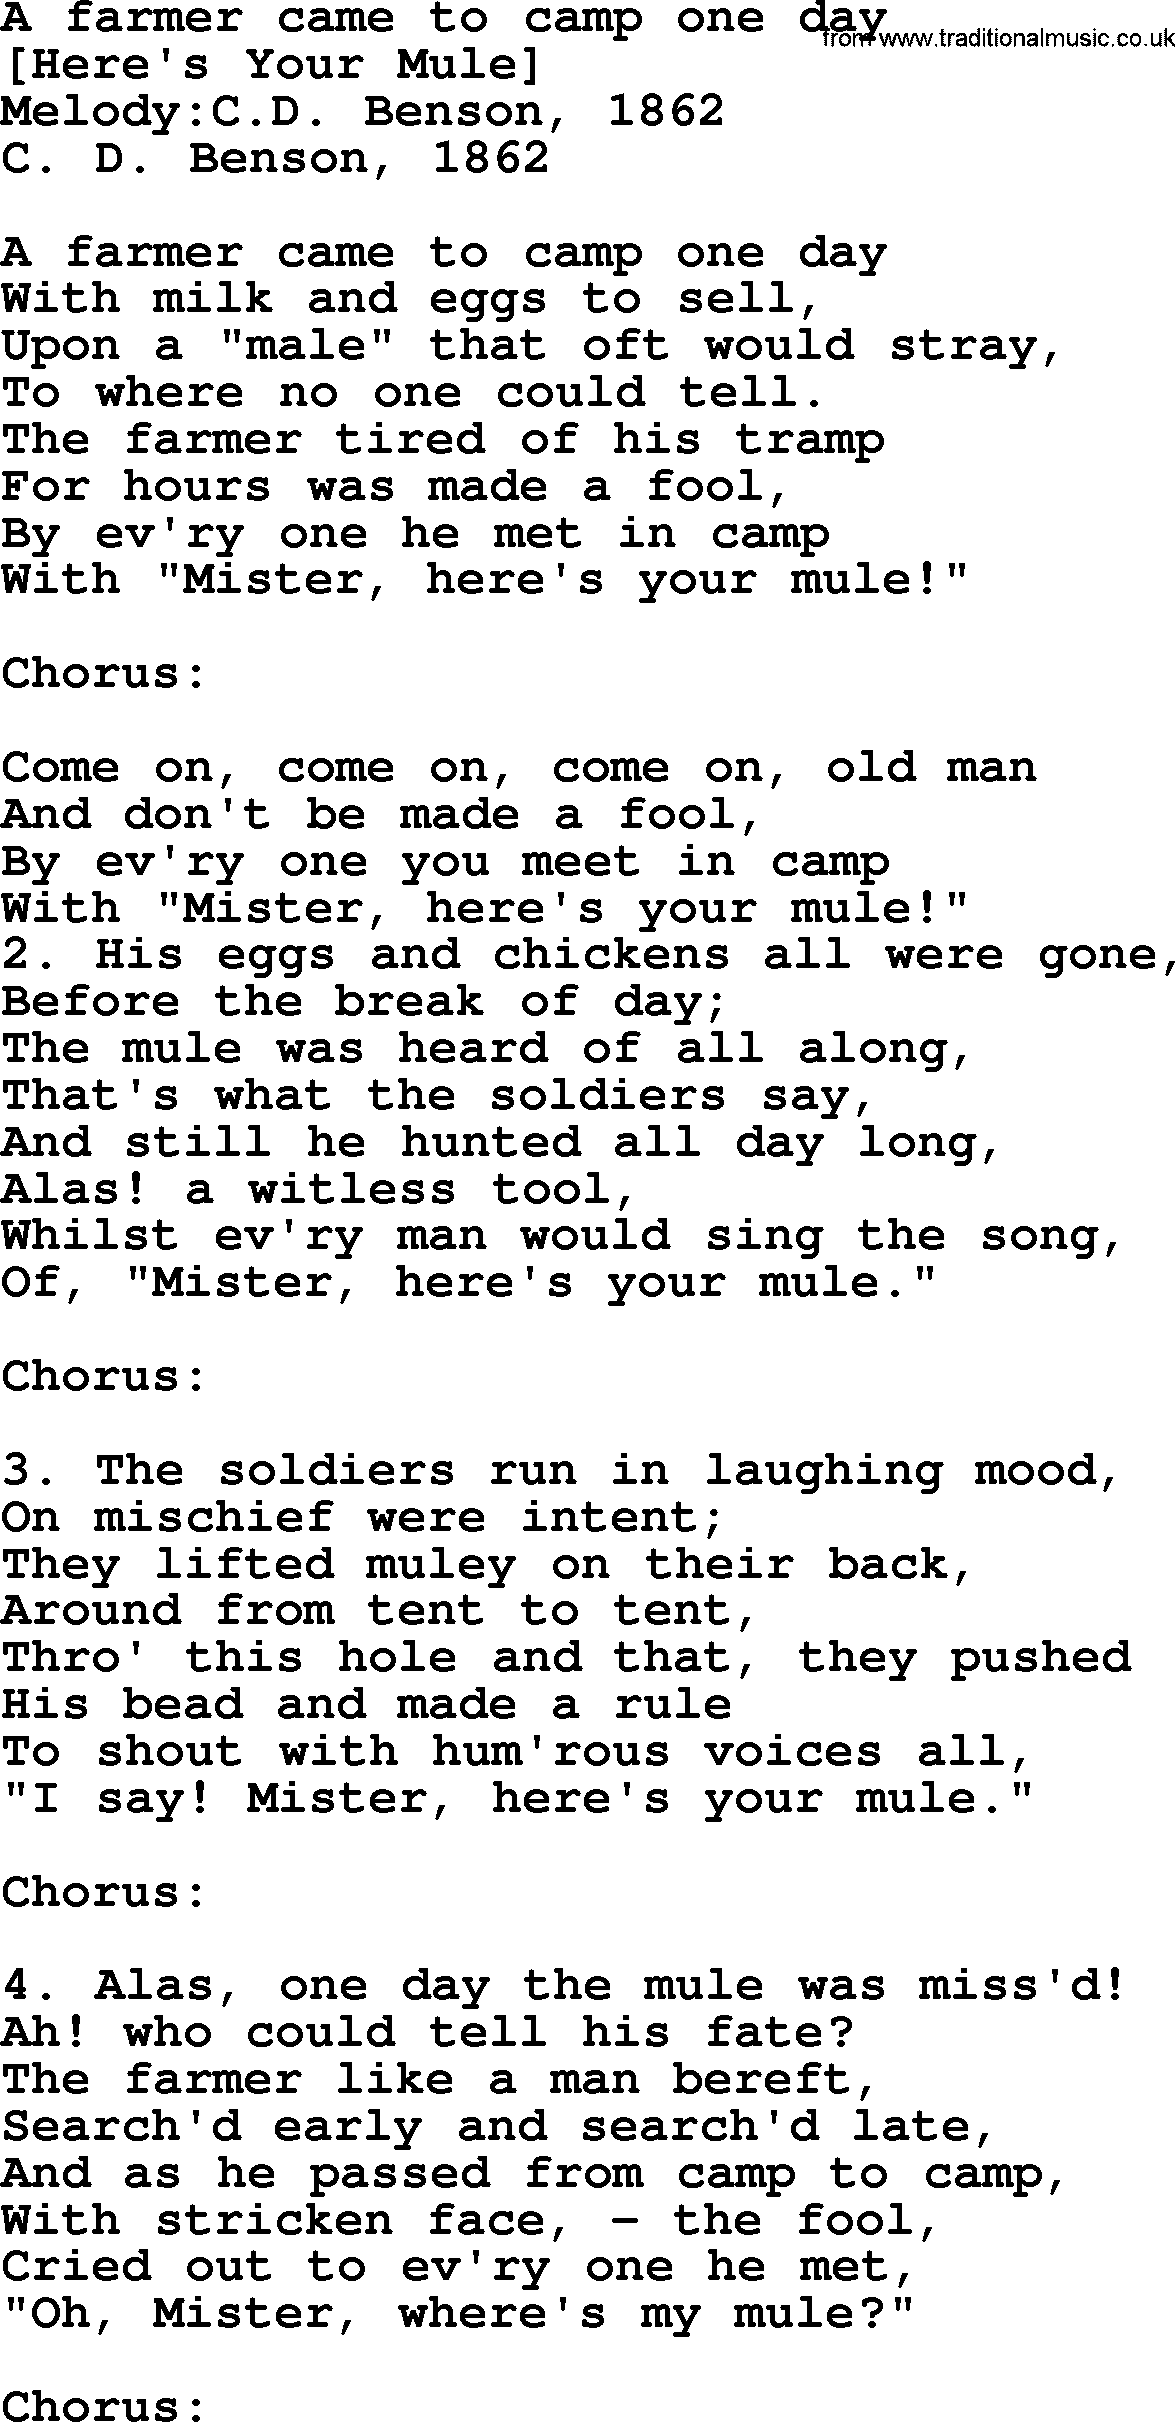 Old American Song: A Farmer Came To Camp One Day, lyrics